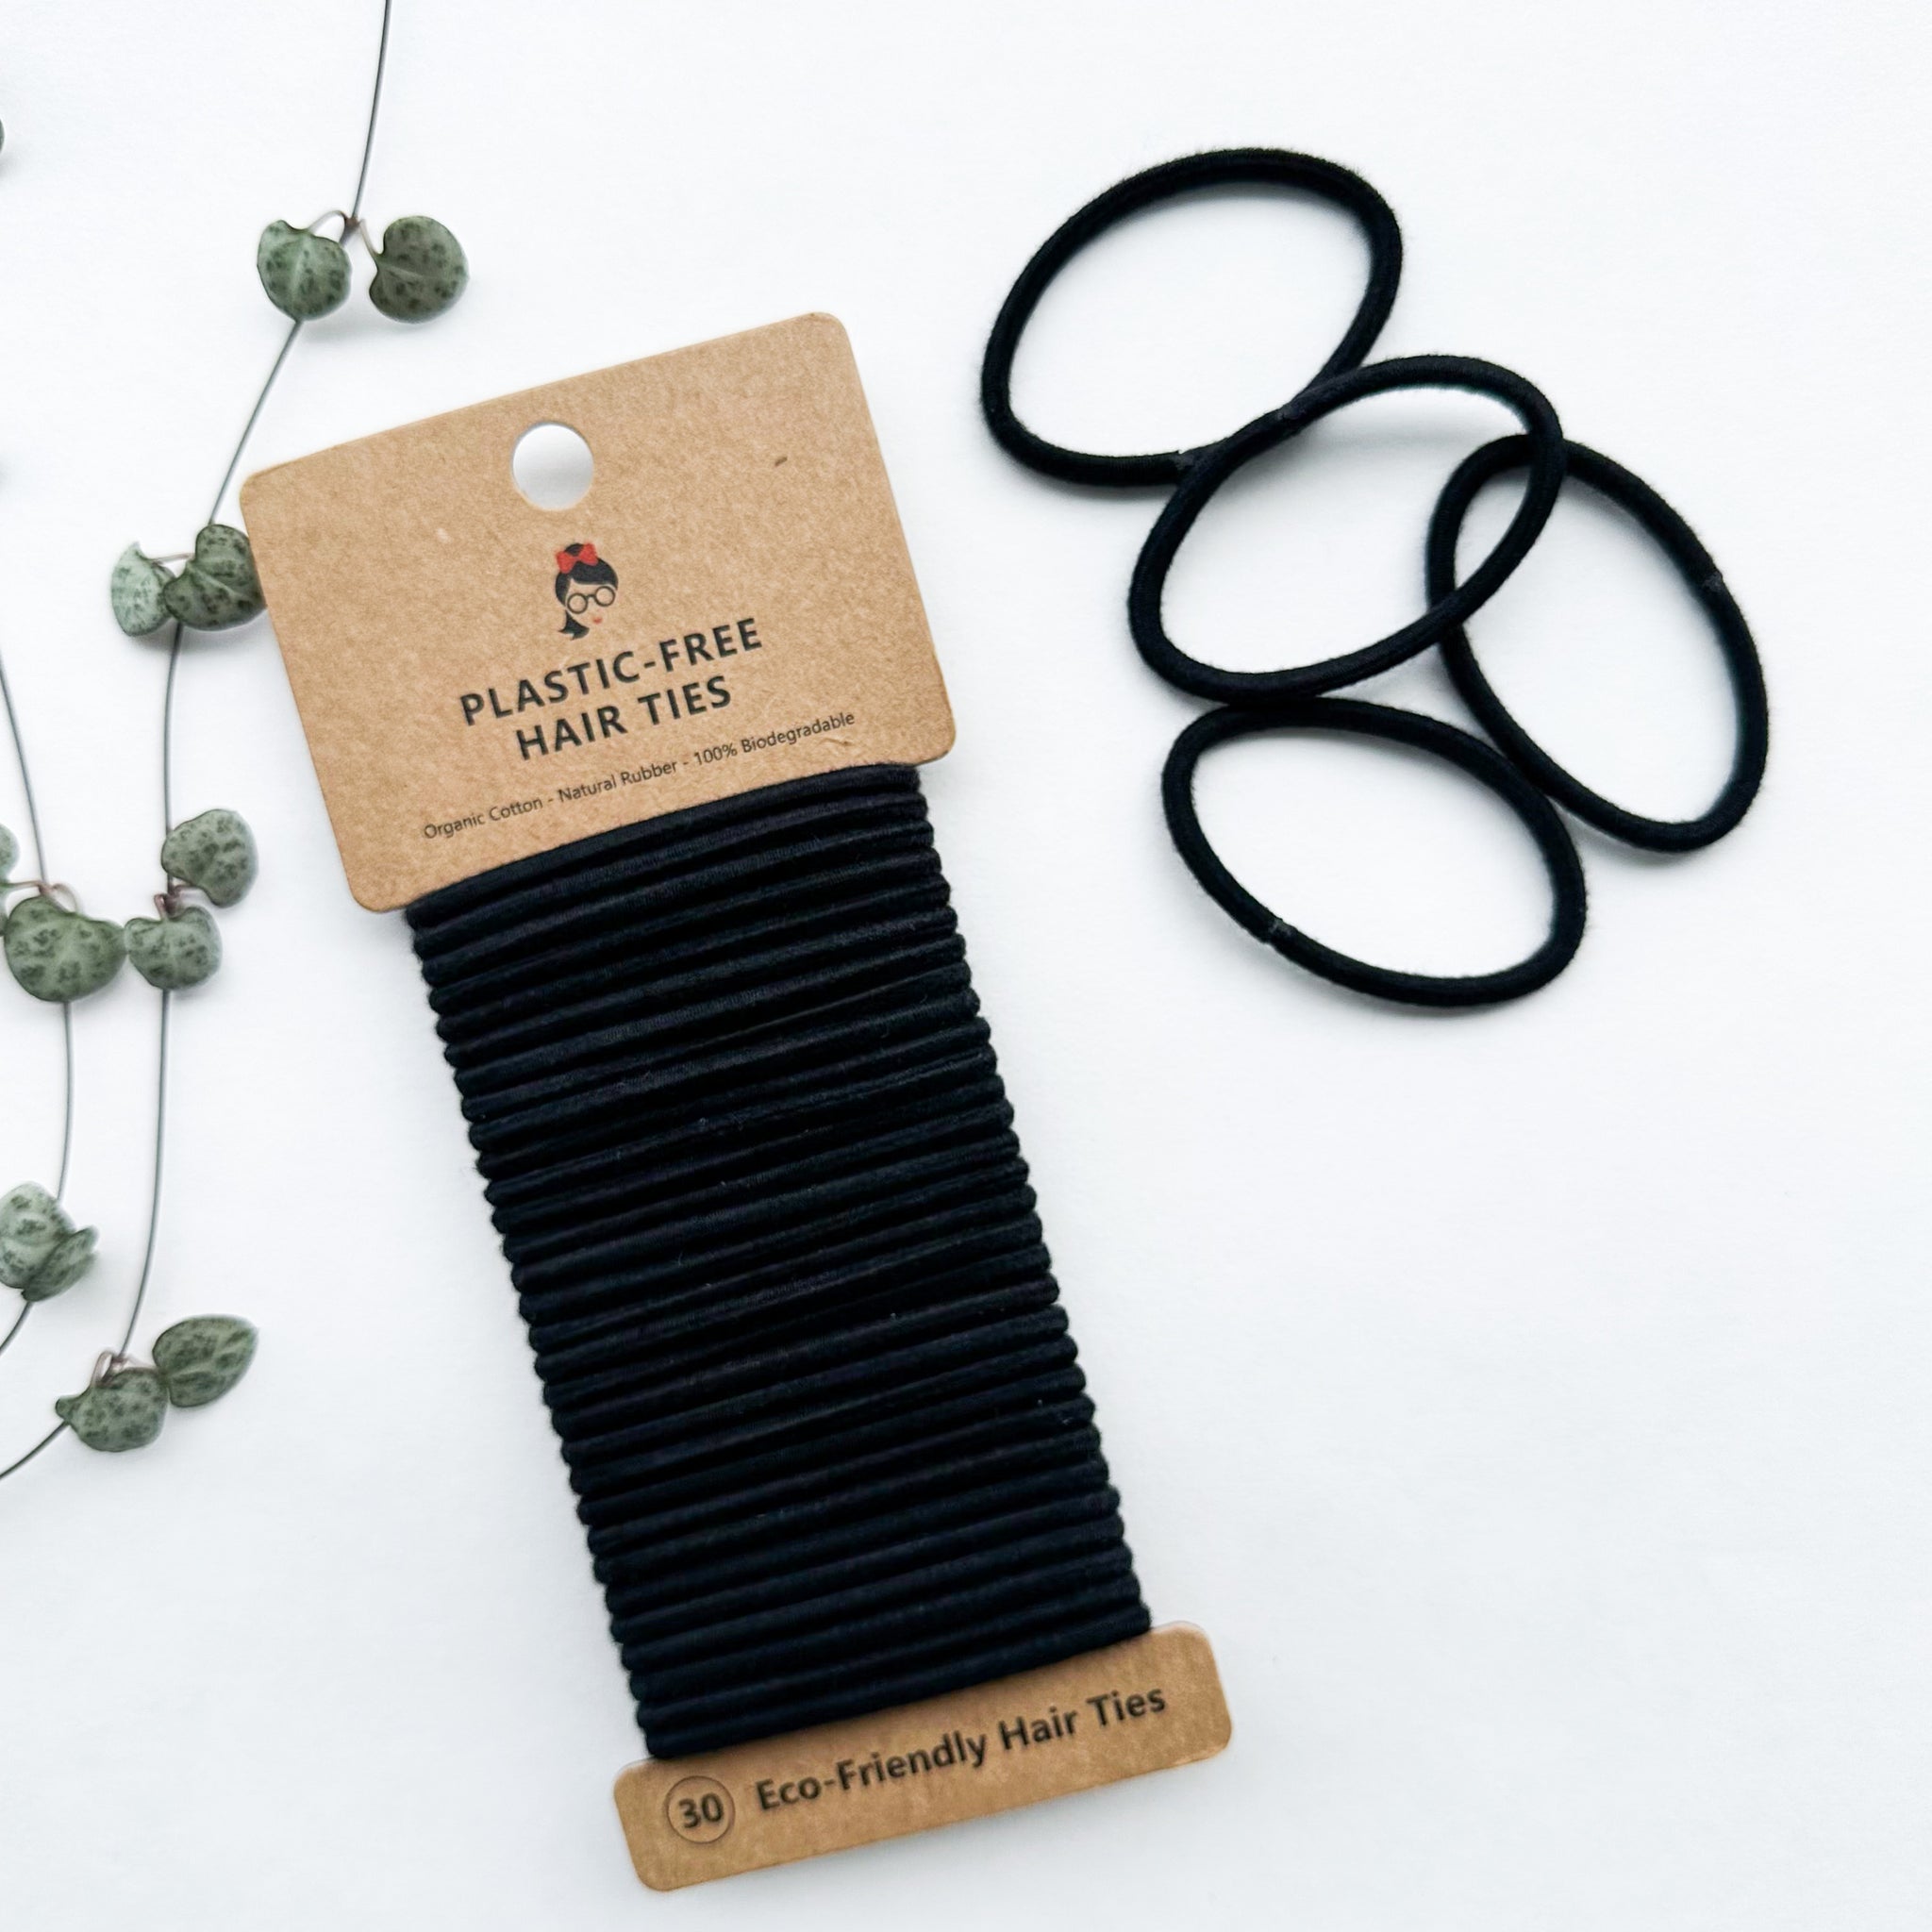 Toxin-Free Braiding Hair Is Eco-Friendly and Biodegradable